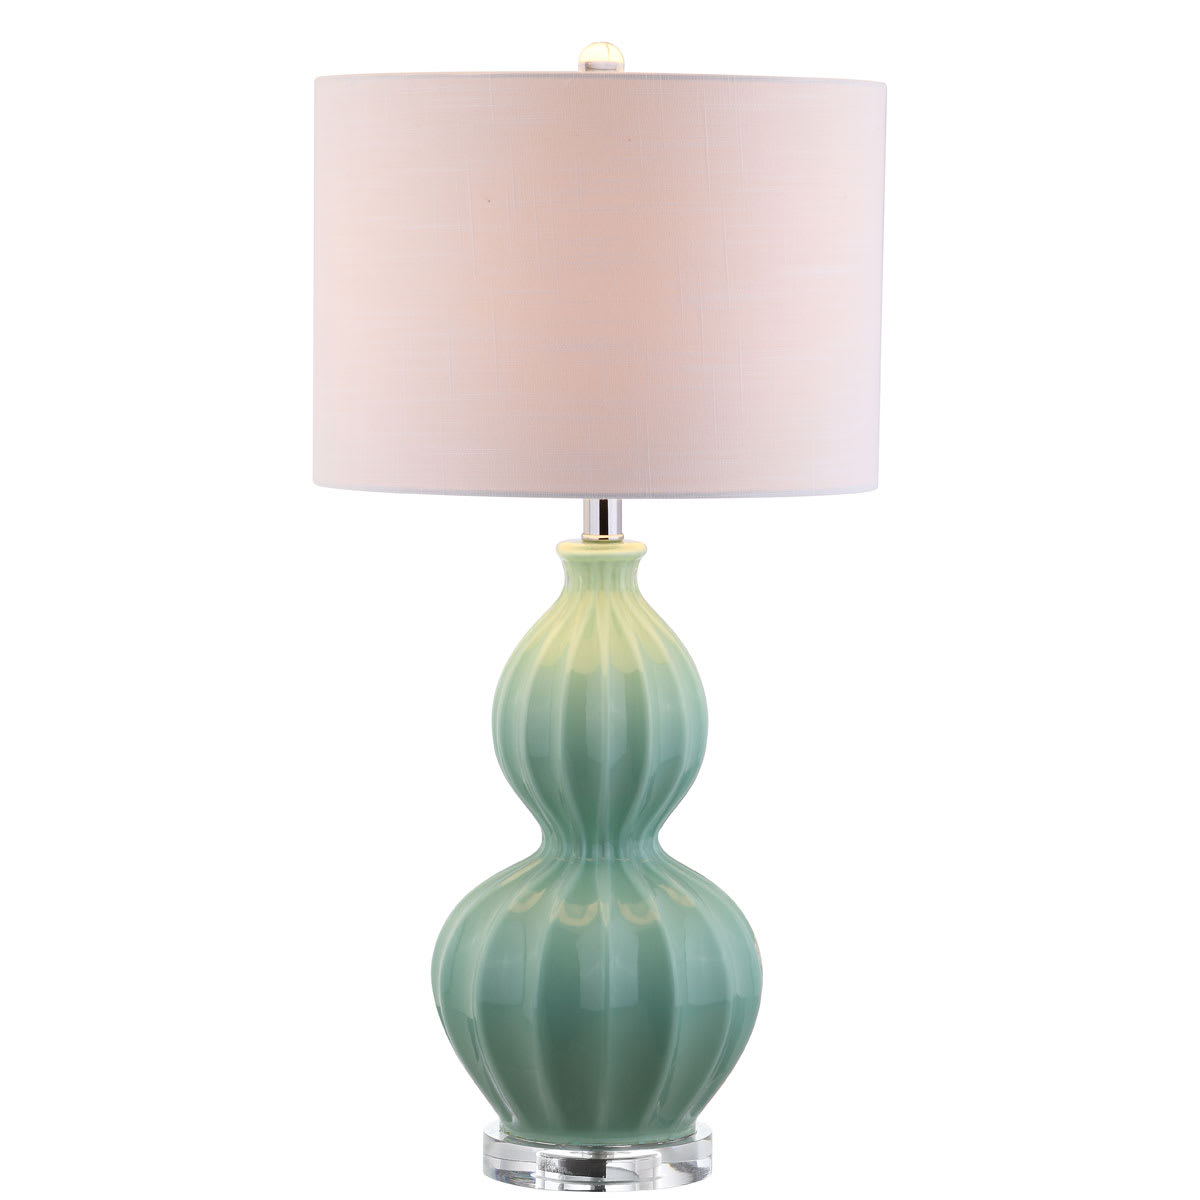 Tall Led Vase Table Lamp, Sea Green Glass Table Lamps